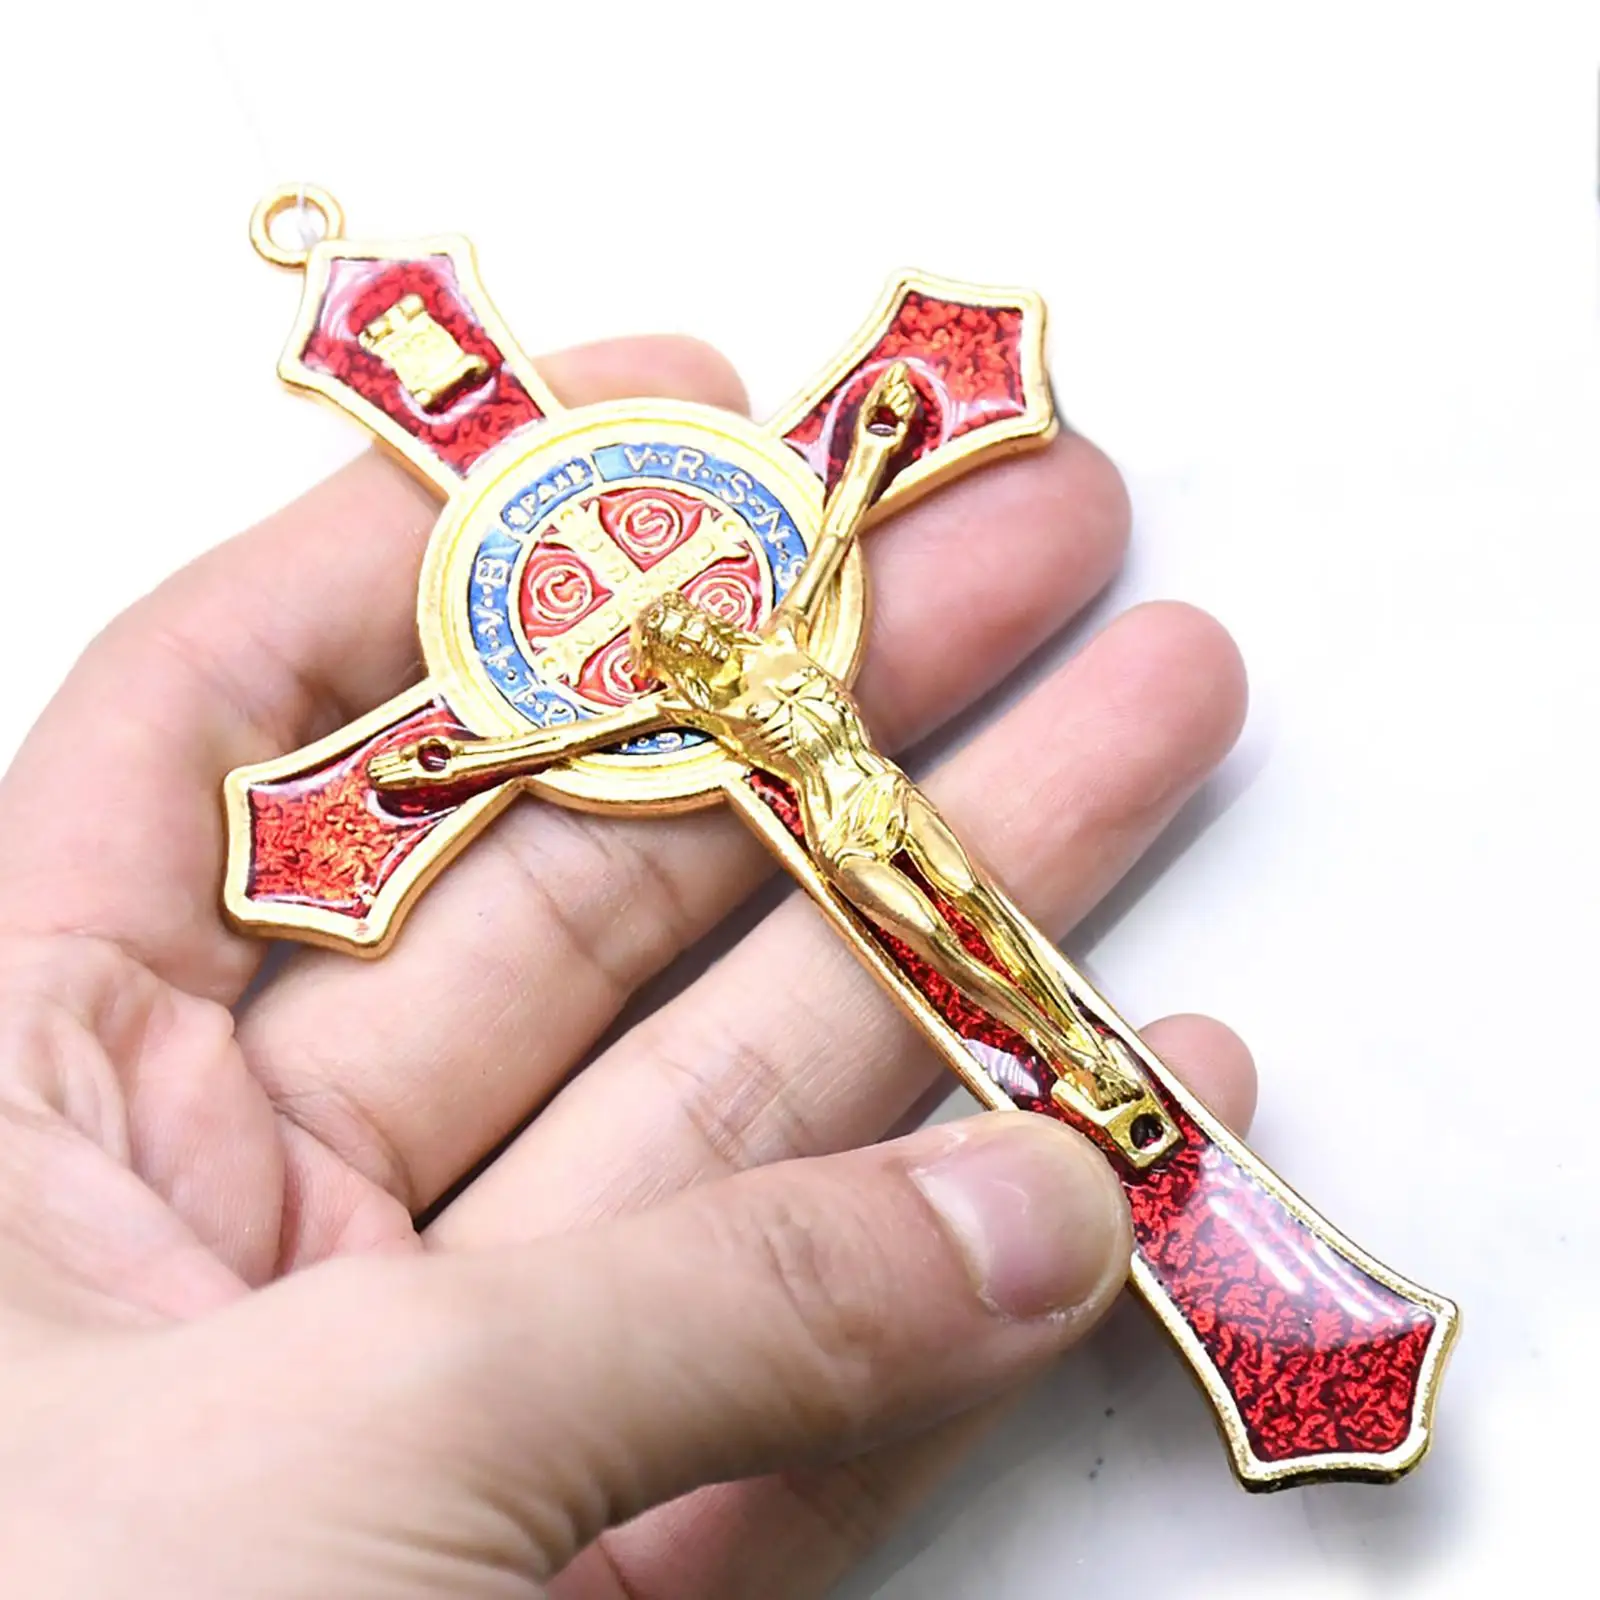 Holy Wall Crucifix Religious Saint for Church Ornaments Gifts